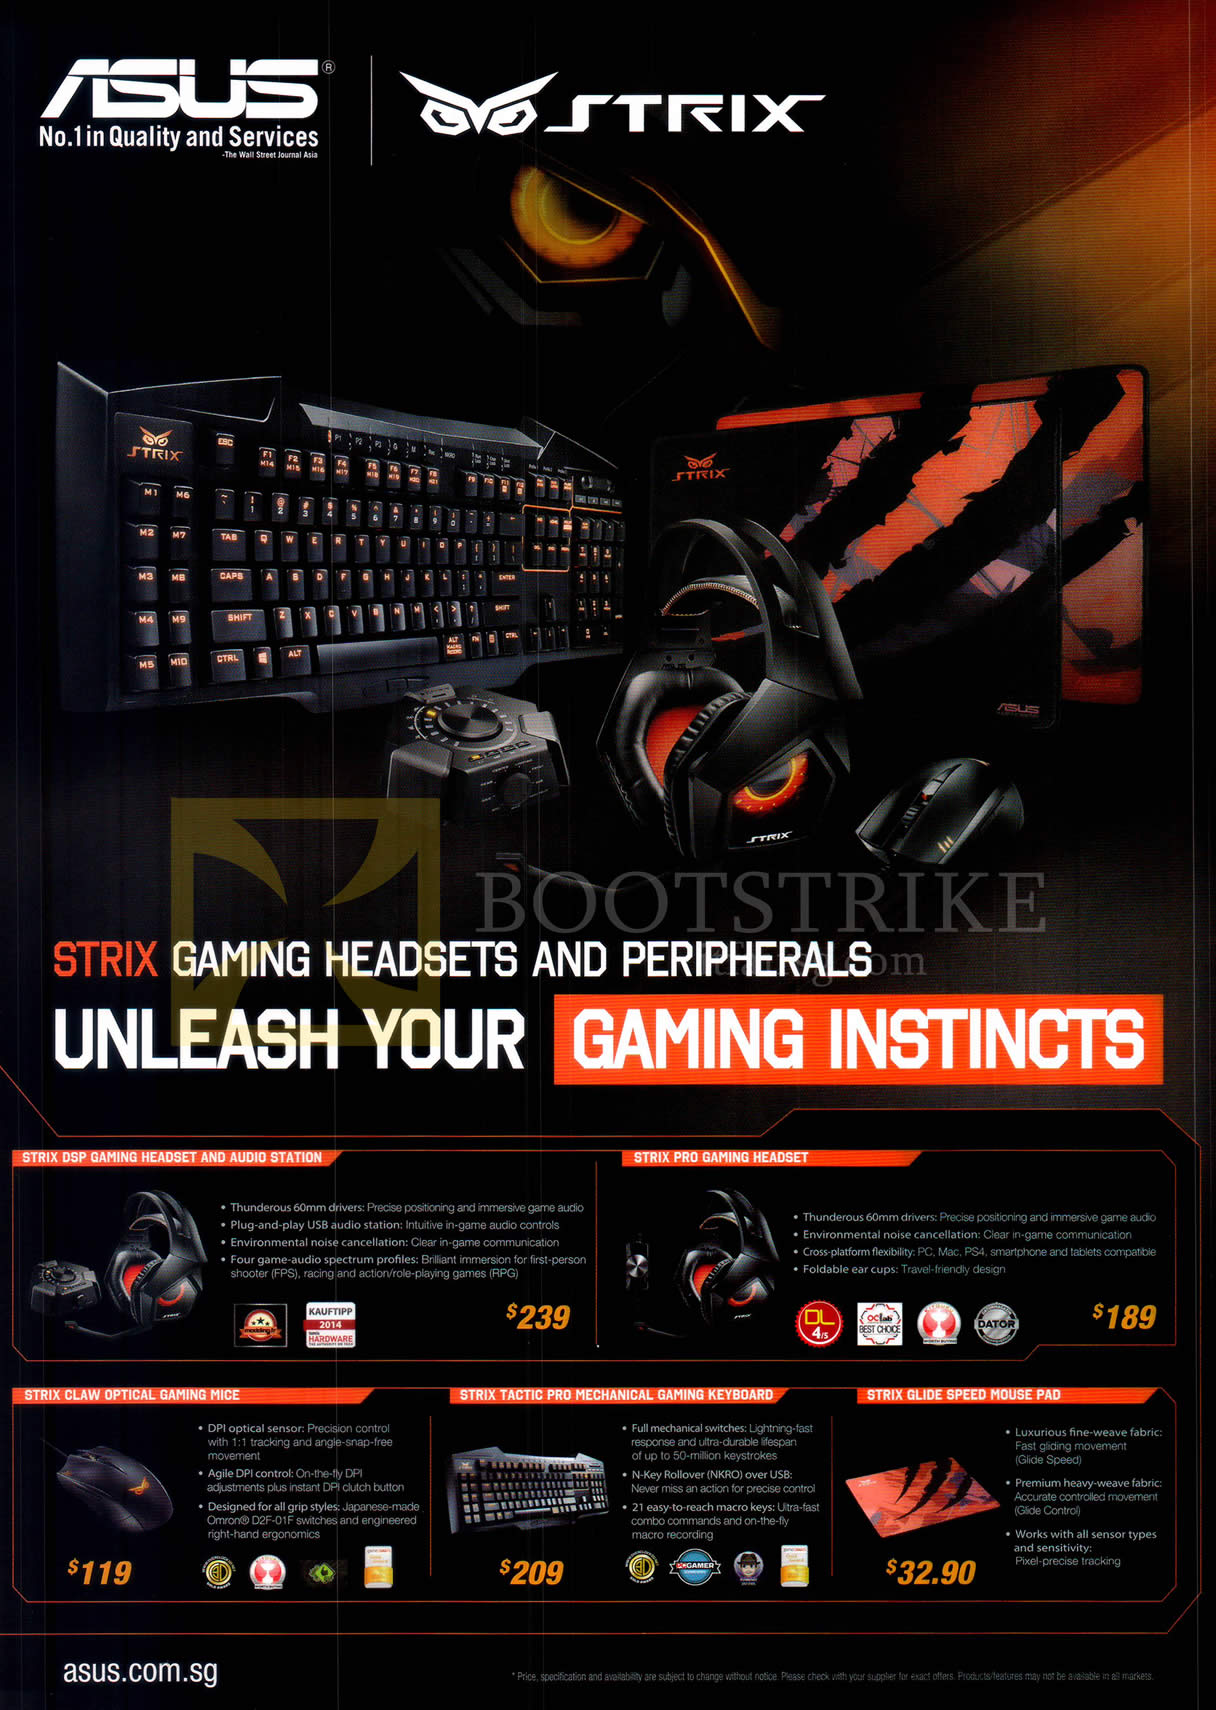 COMEX 2015 price list image brochure of ASUS Gaming Headsets Strix DSP, Claw Optical Mouse, Pro, Tactic Pro Mechanical Keyobard, Glow, Glide Speed Mouse Pad